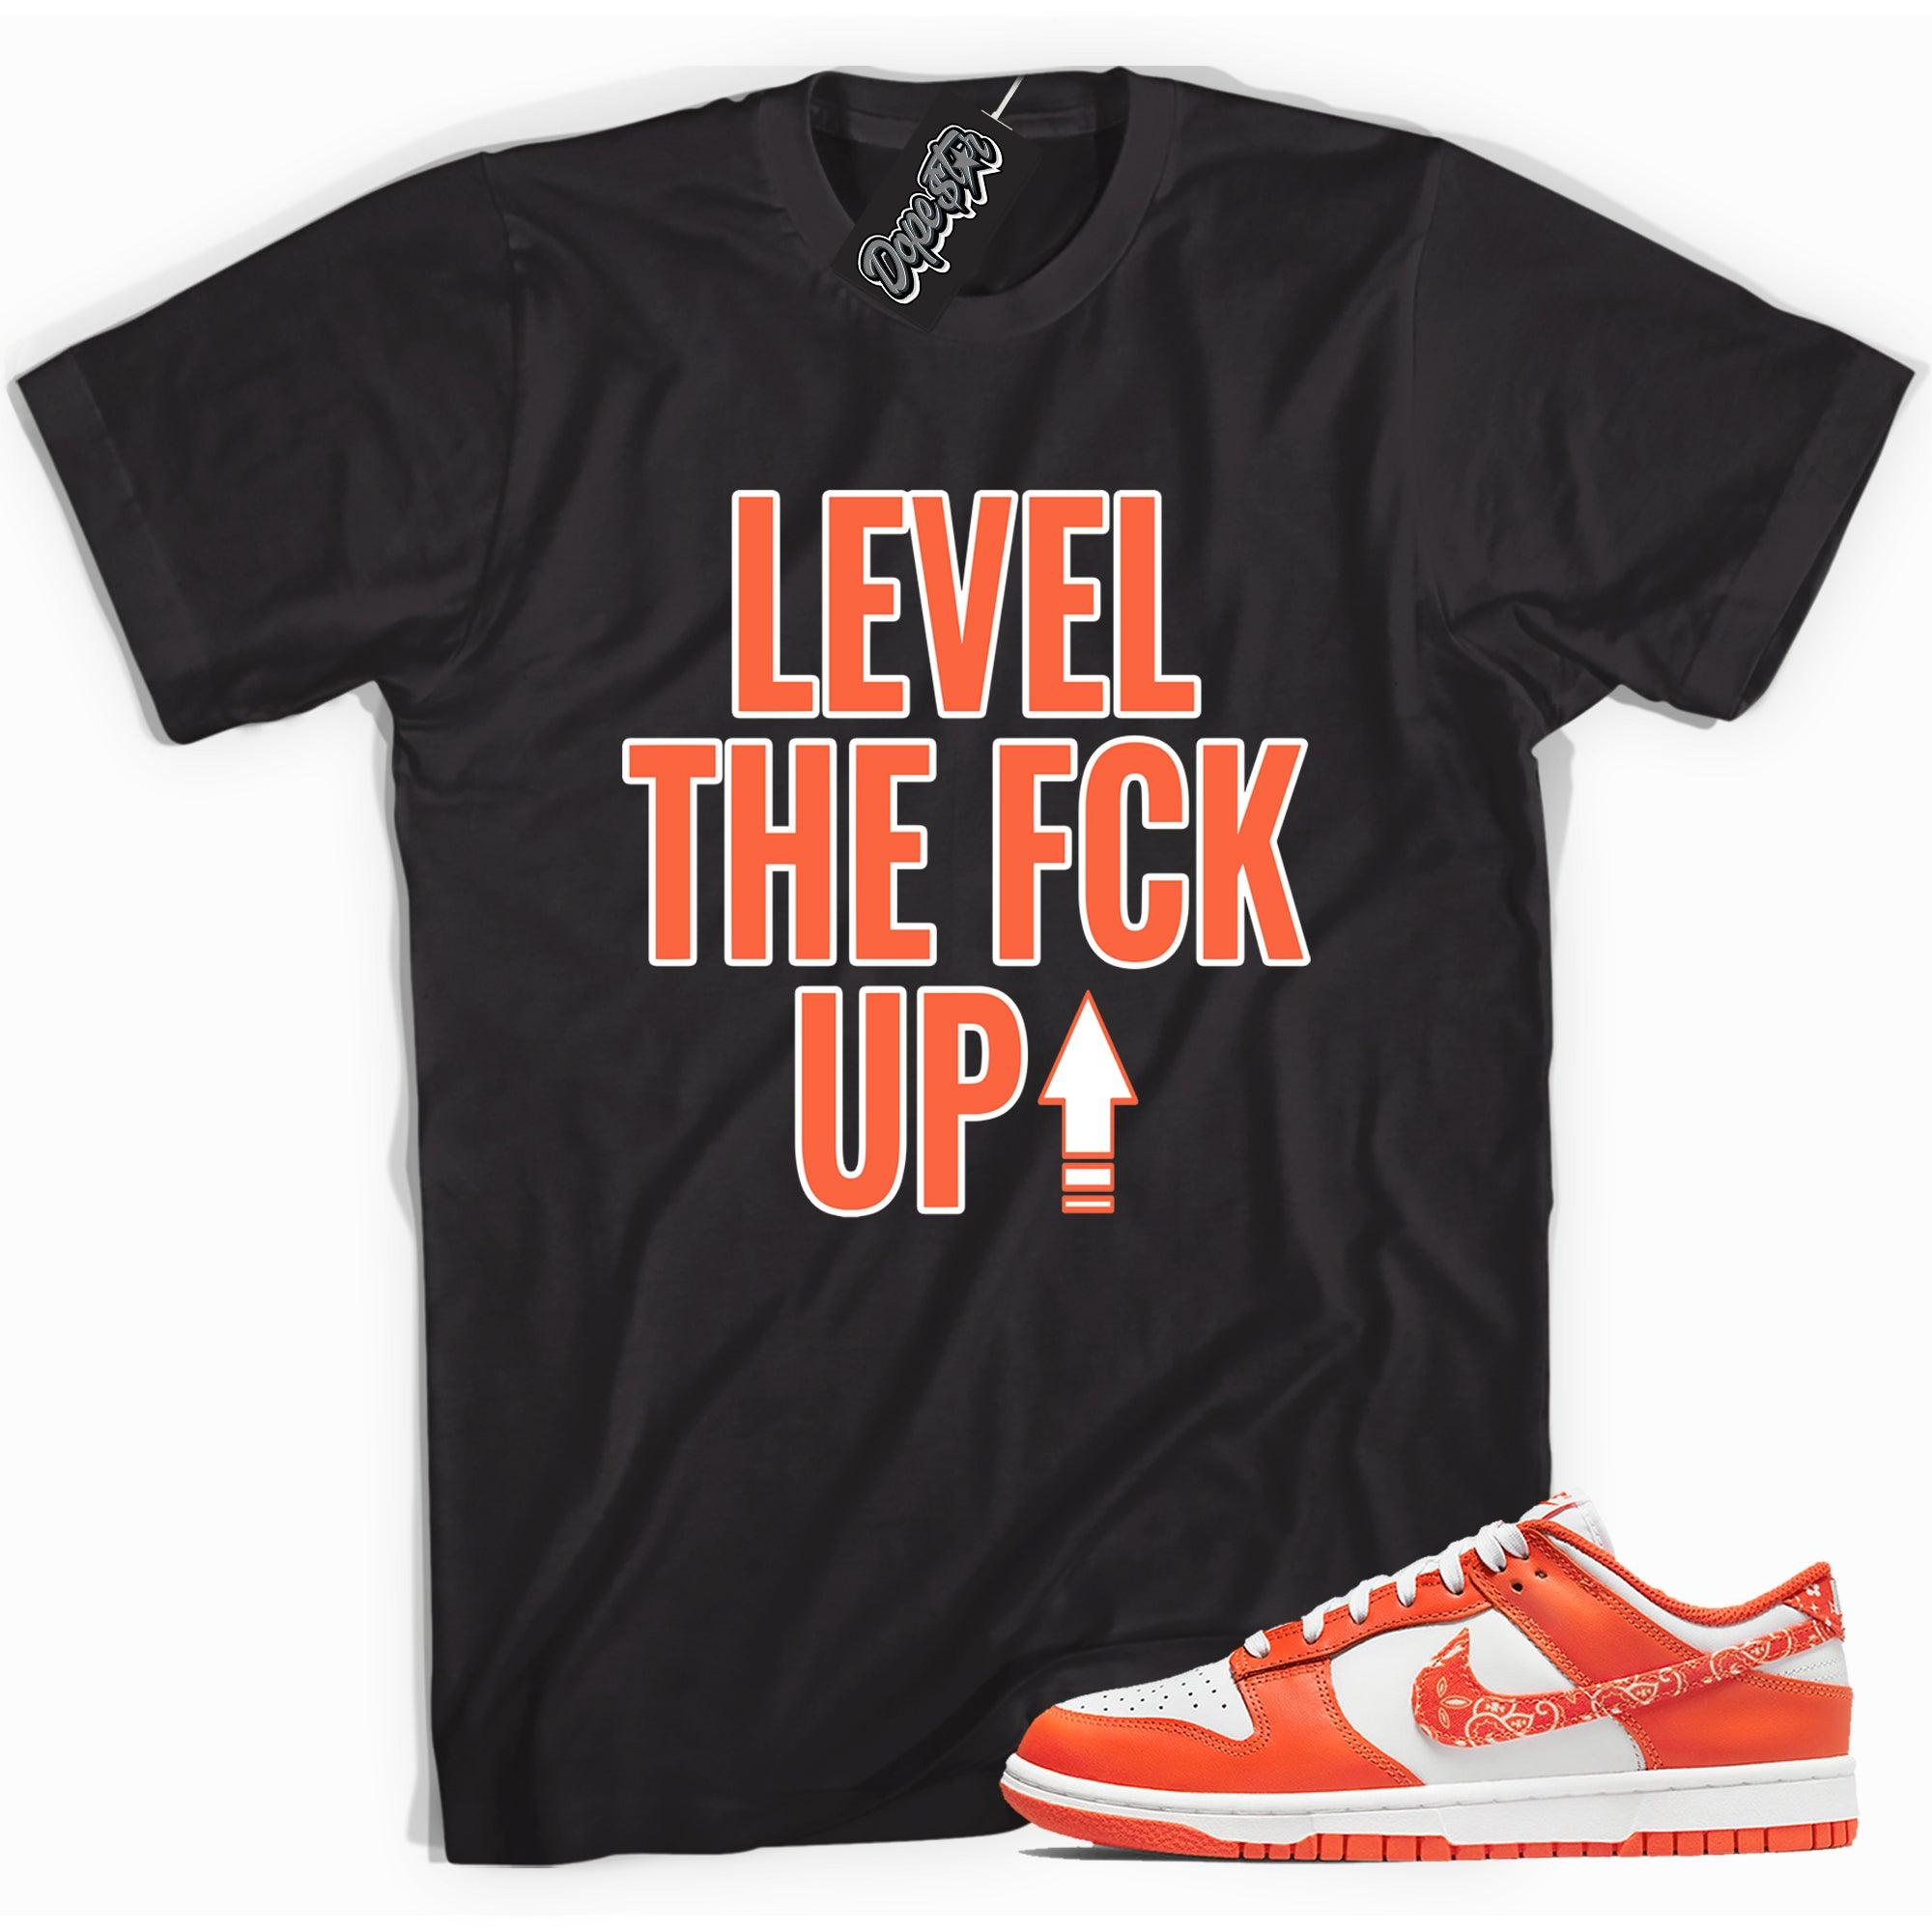 Cool black graphic tee with 'level up' print, that perfectly matches Nike Dunk Low Essential Paisley Pack Orange sneakers.